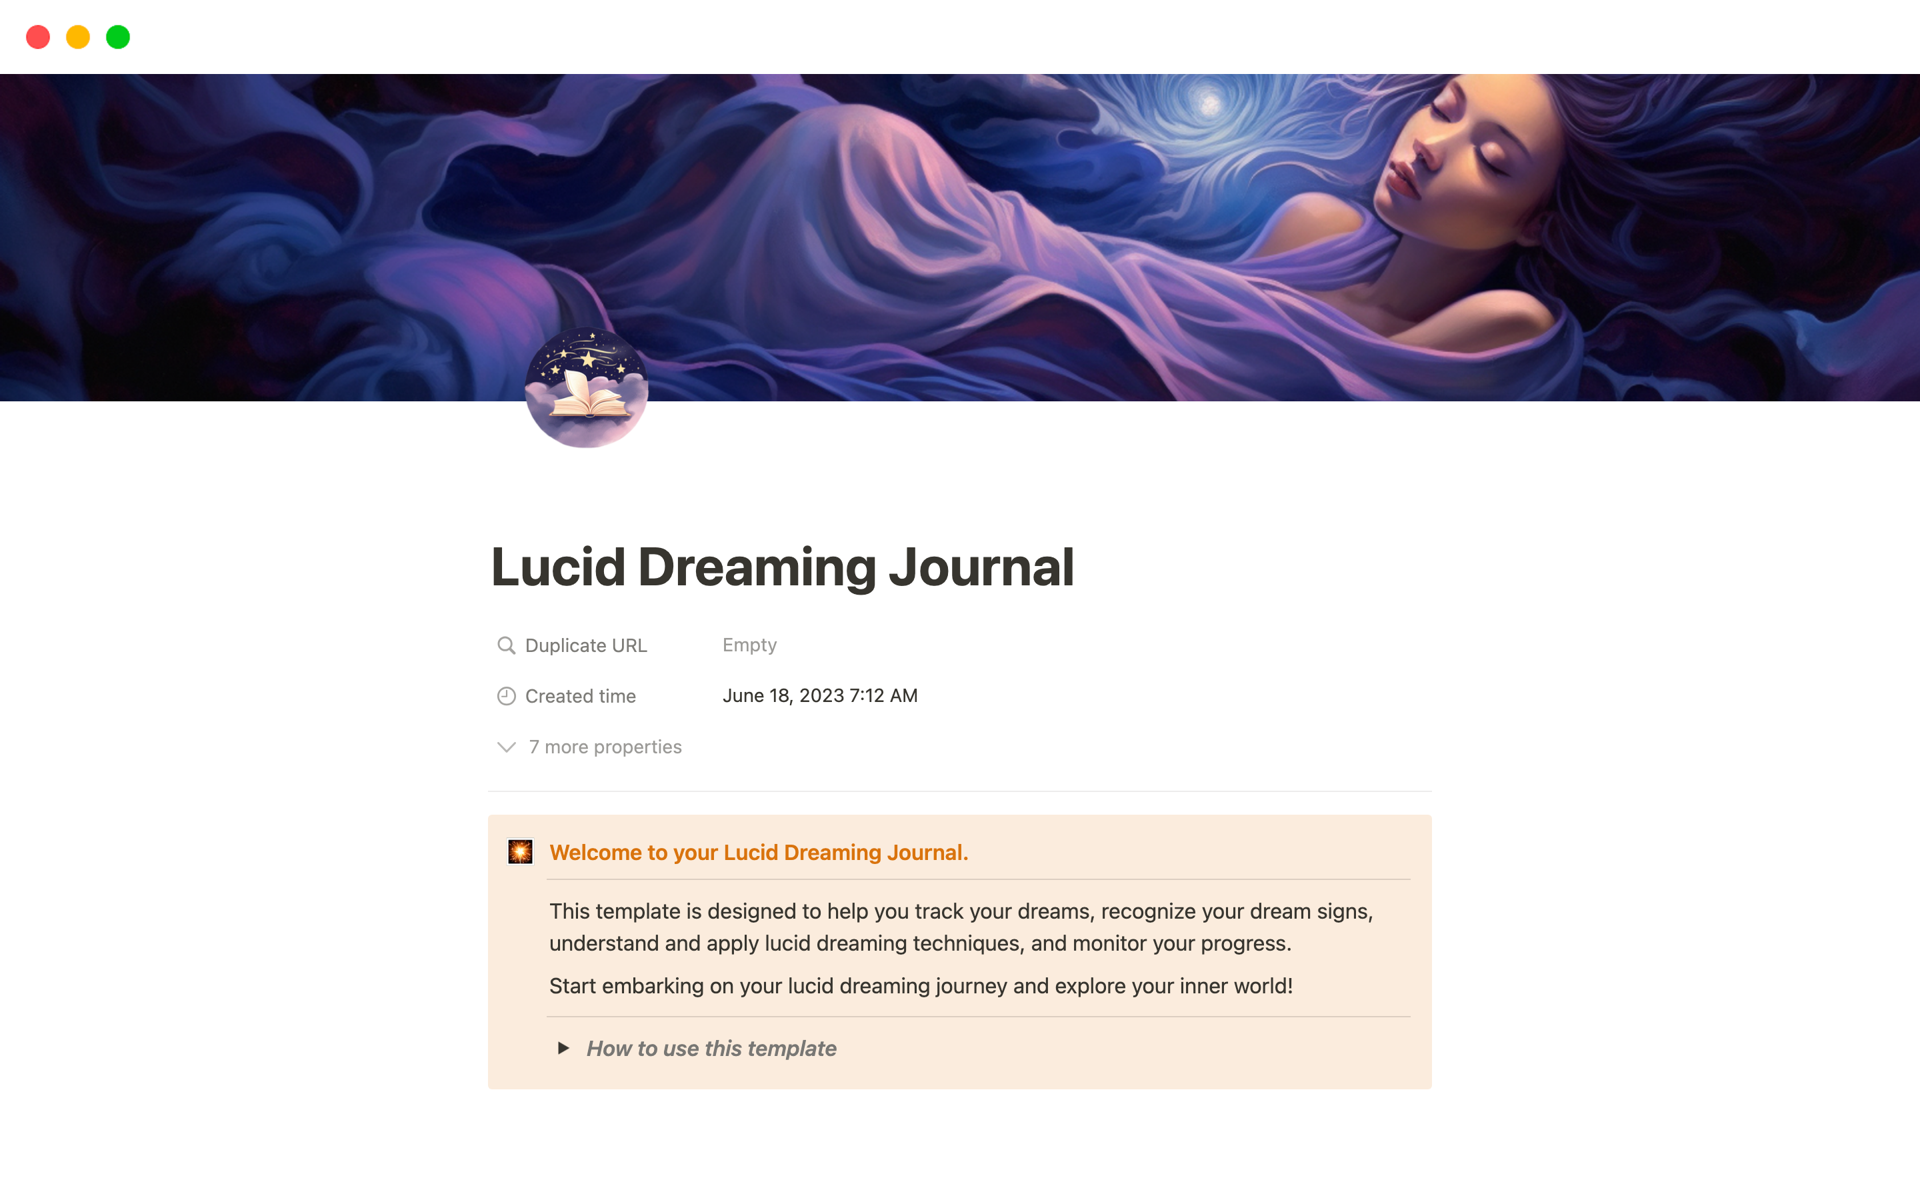 Master the art of lucid dreaming with the help of Lucid Dreaming Journal